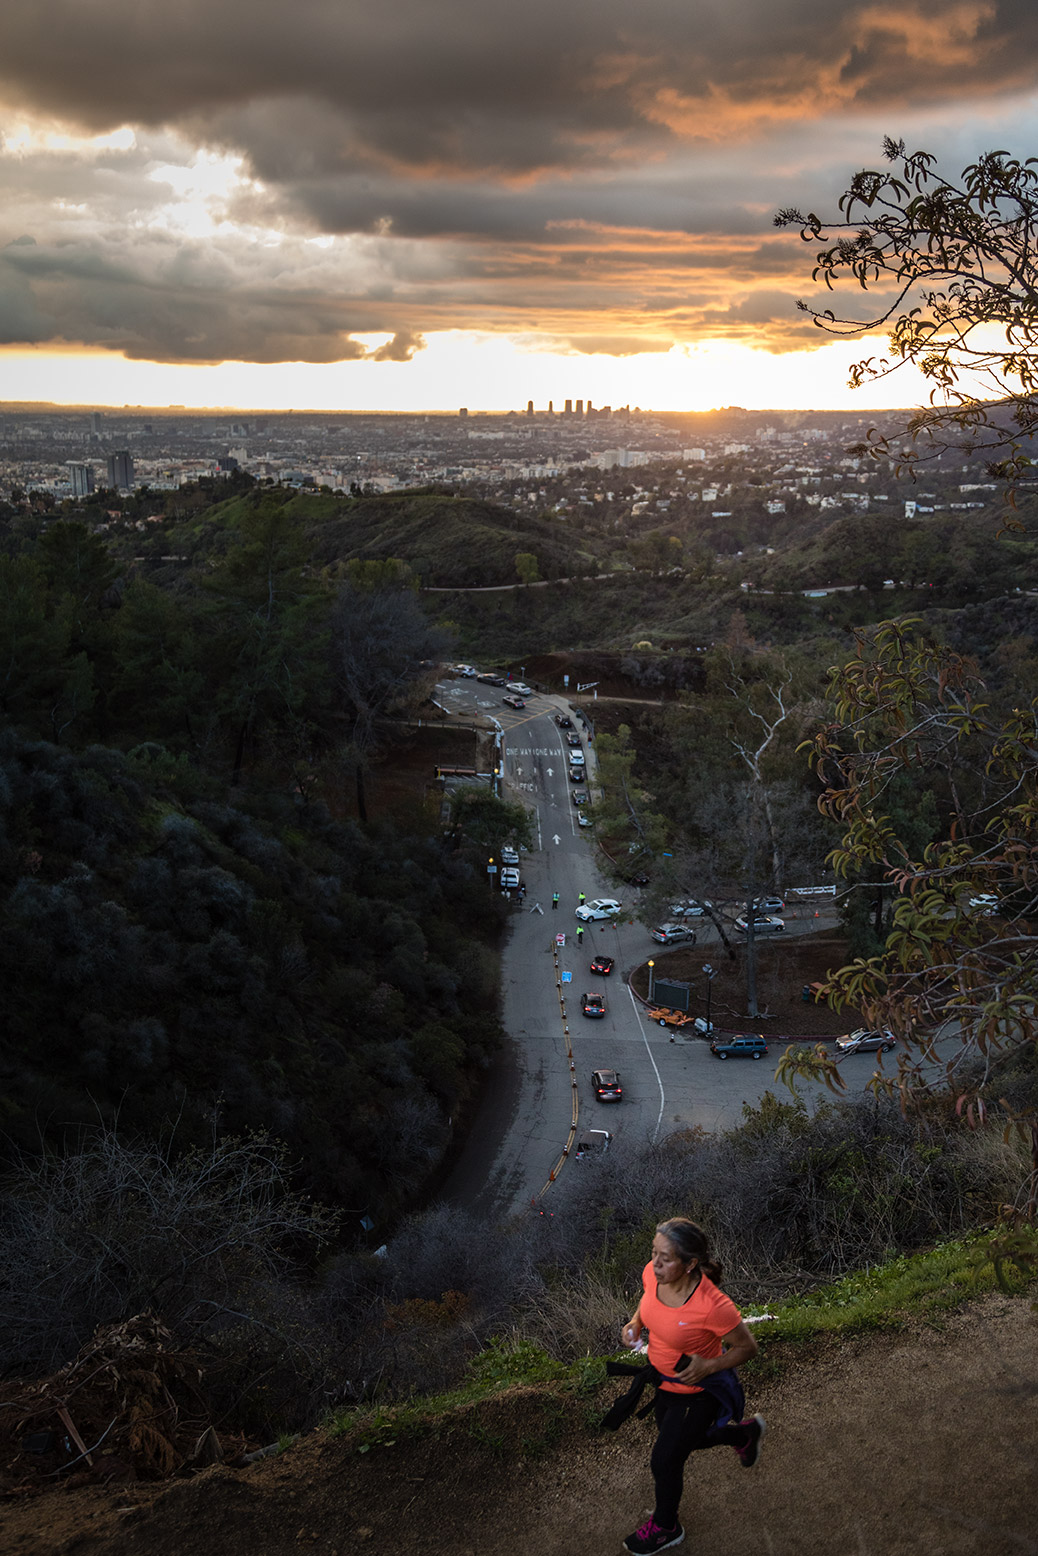 Griffith Park Runner at Sunset